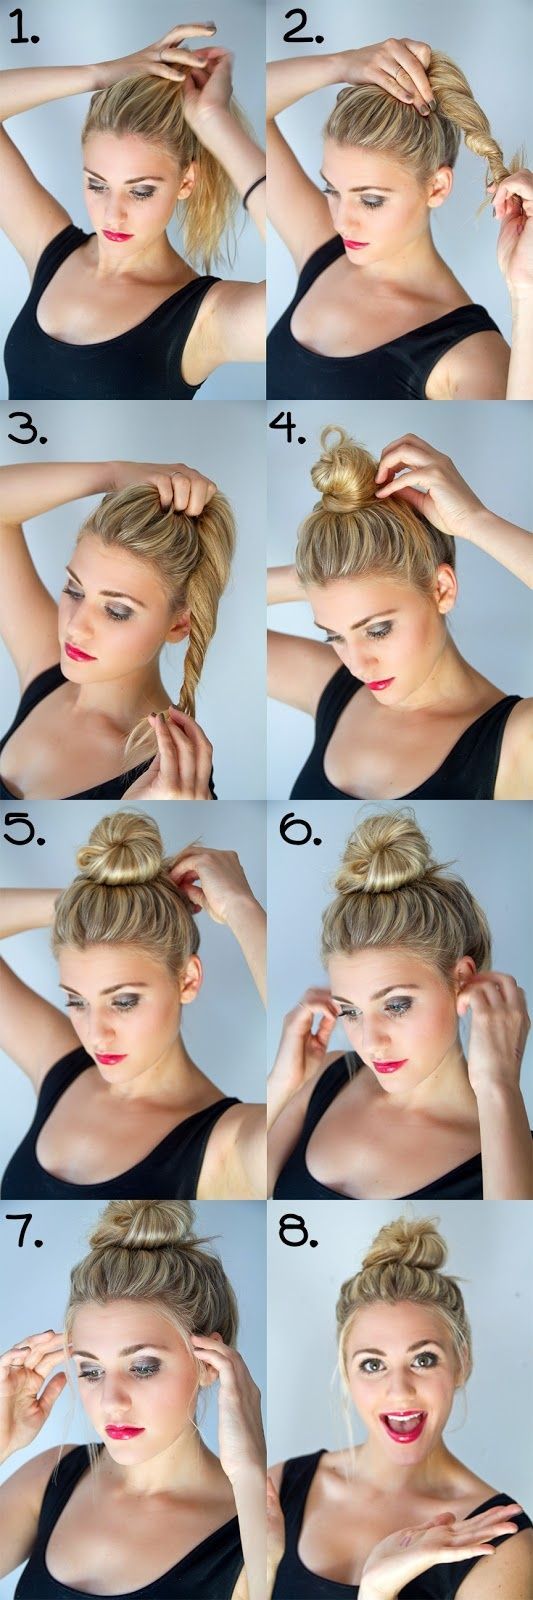 11 Easy Gym Hairstyles for Every Type of Workout (2020 Update)